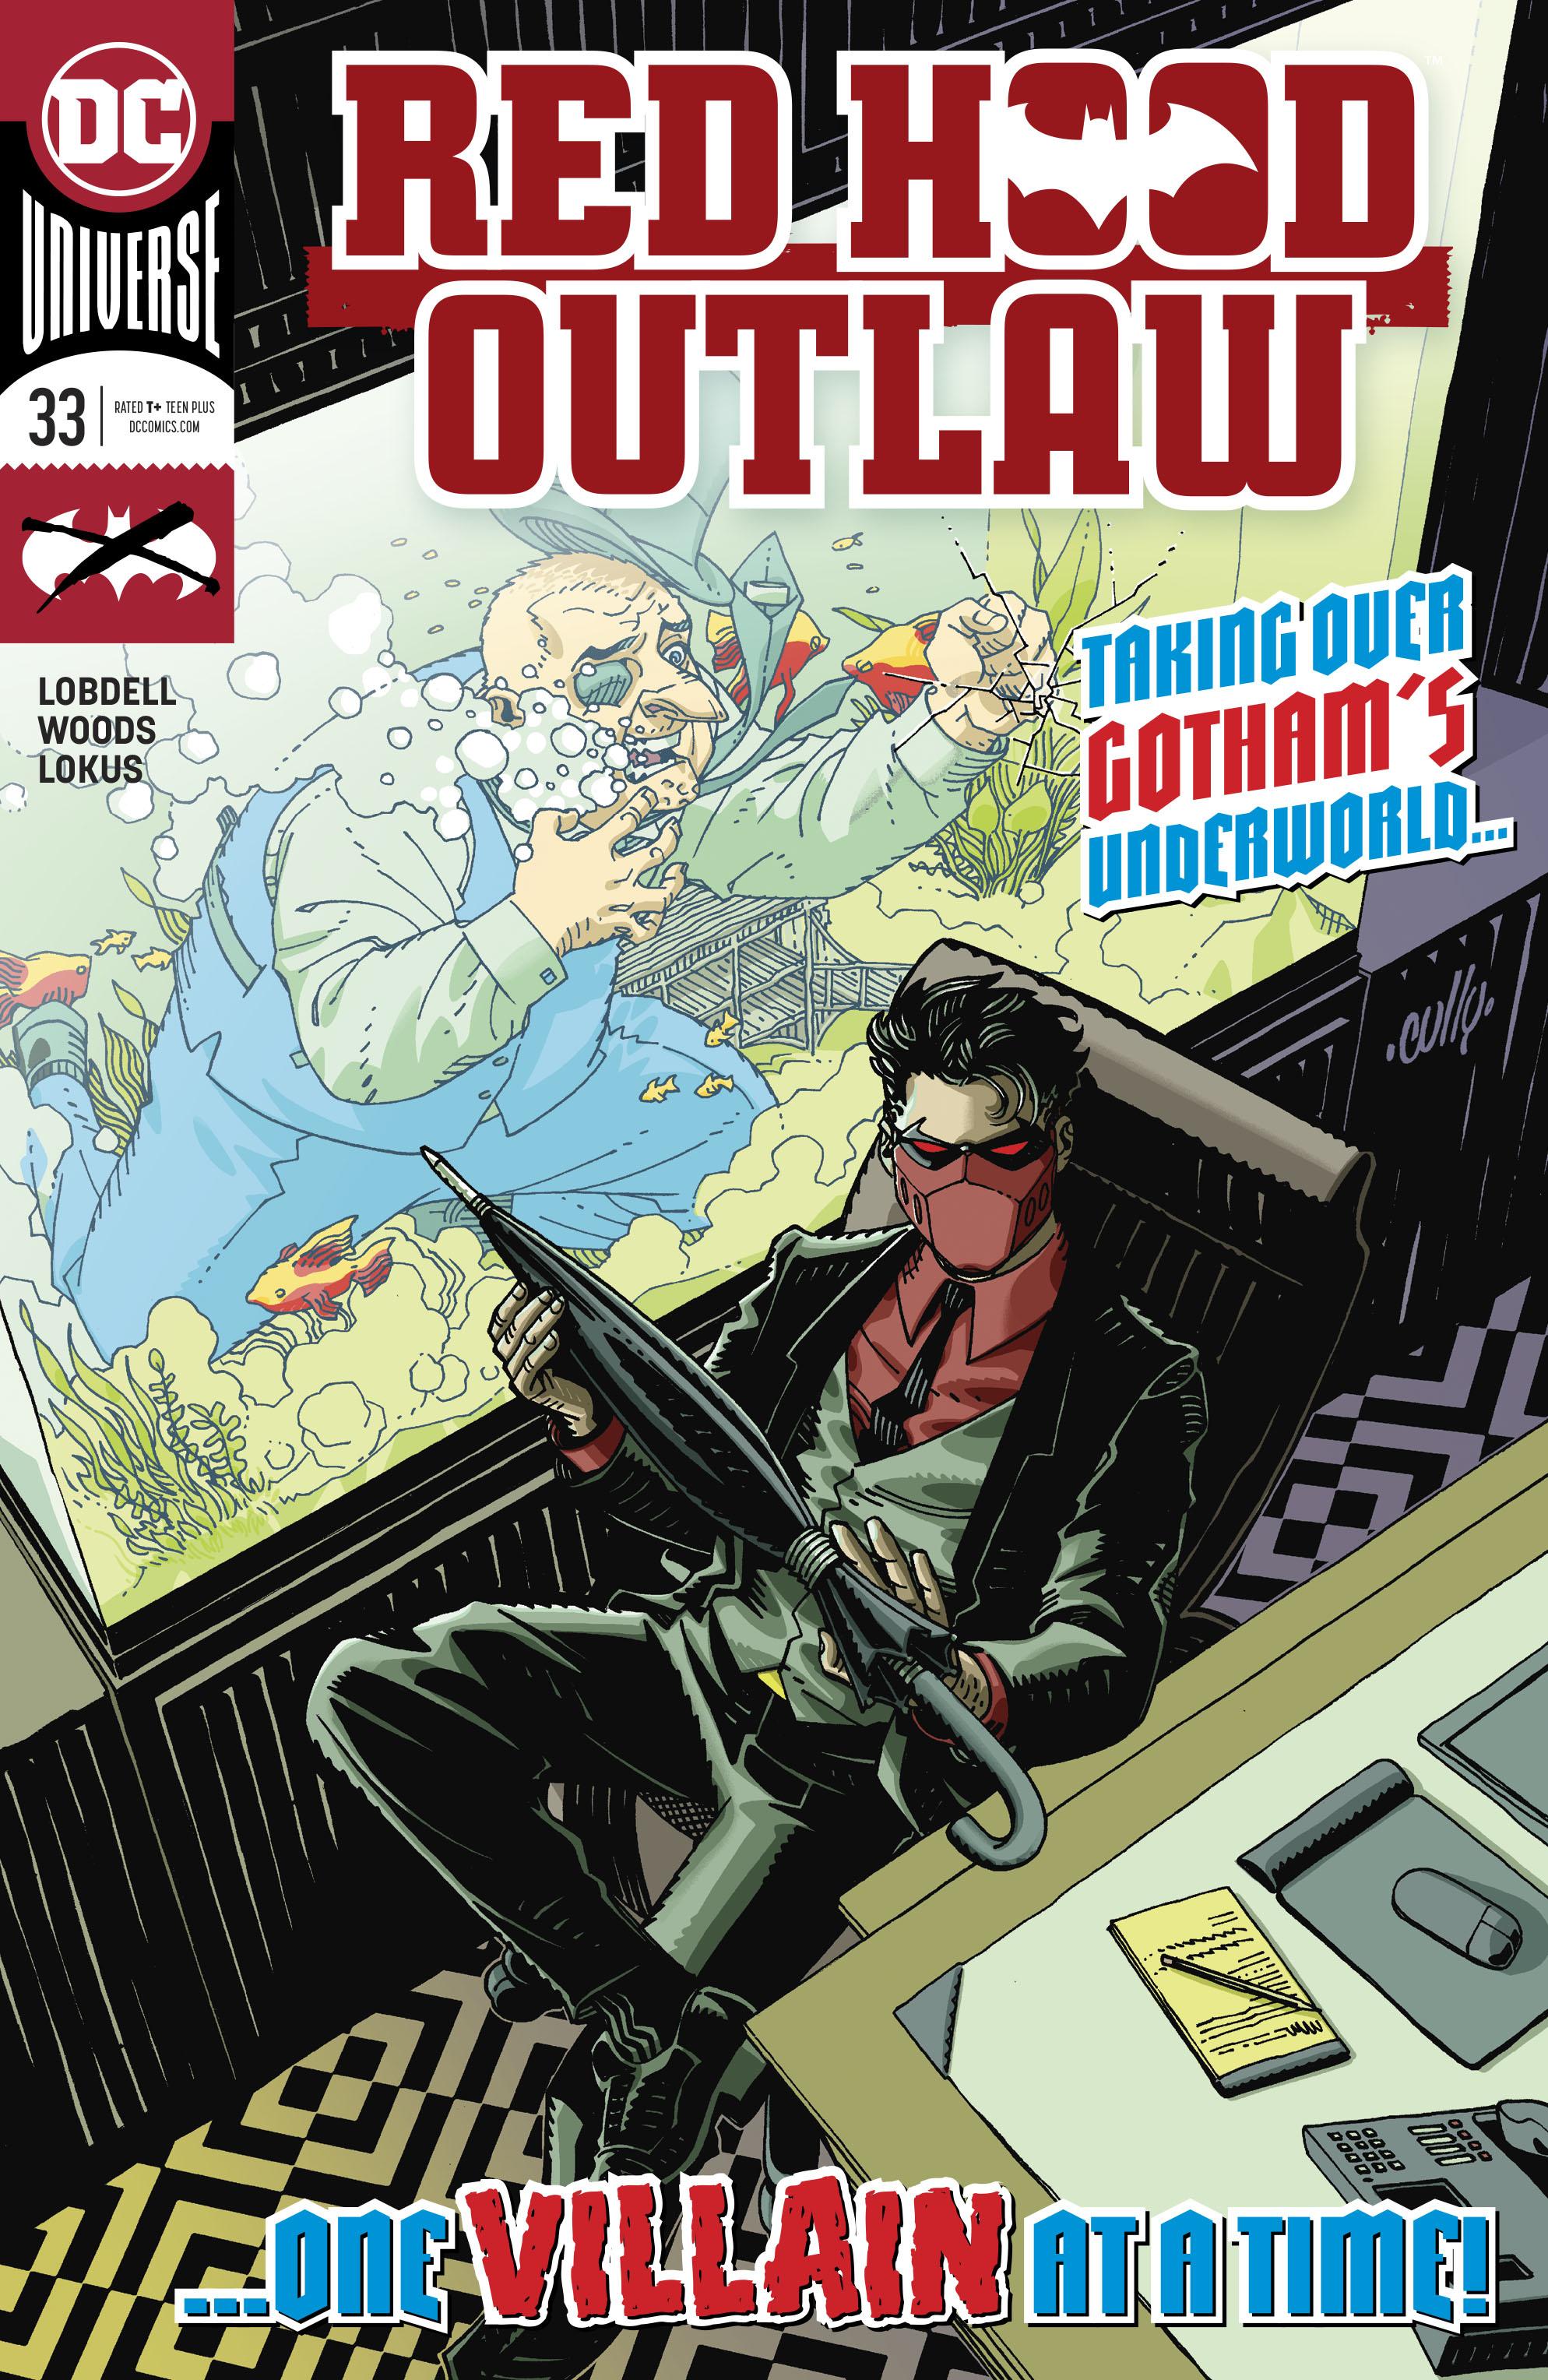 Red Hood and the Outlaws Vol. 2 #33